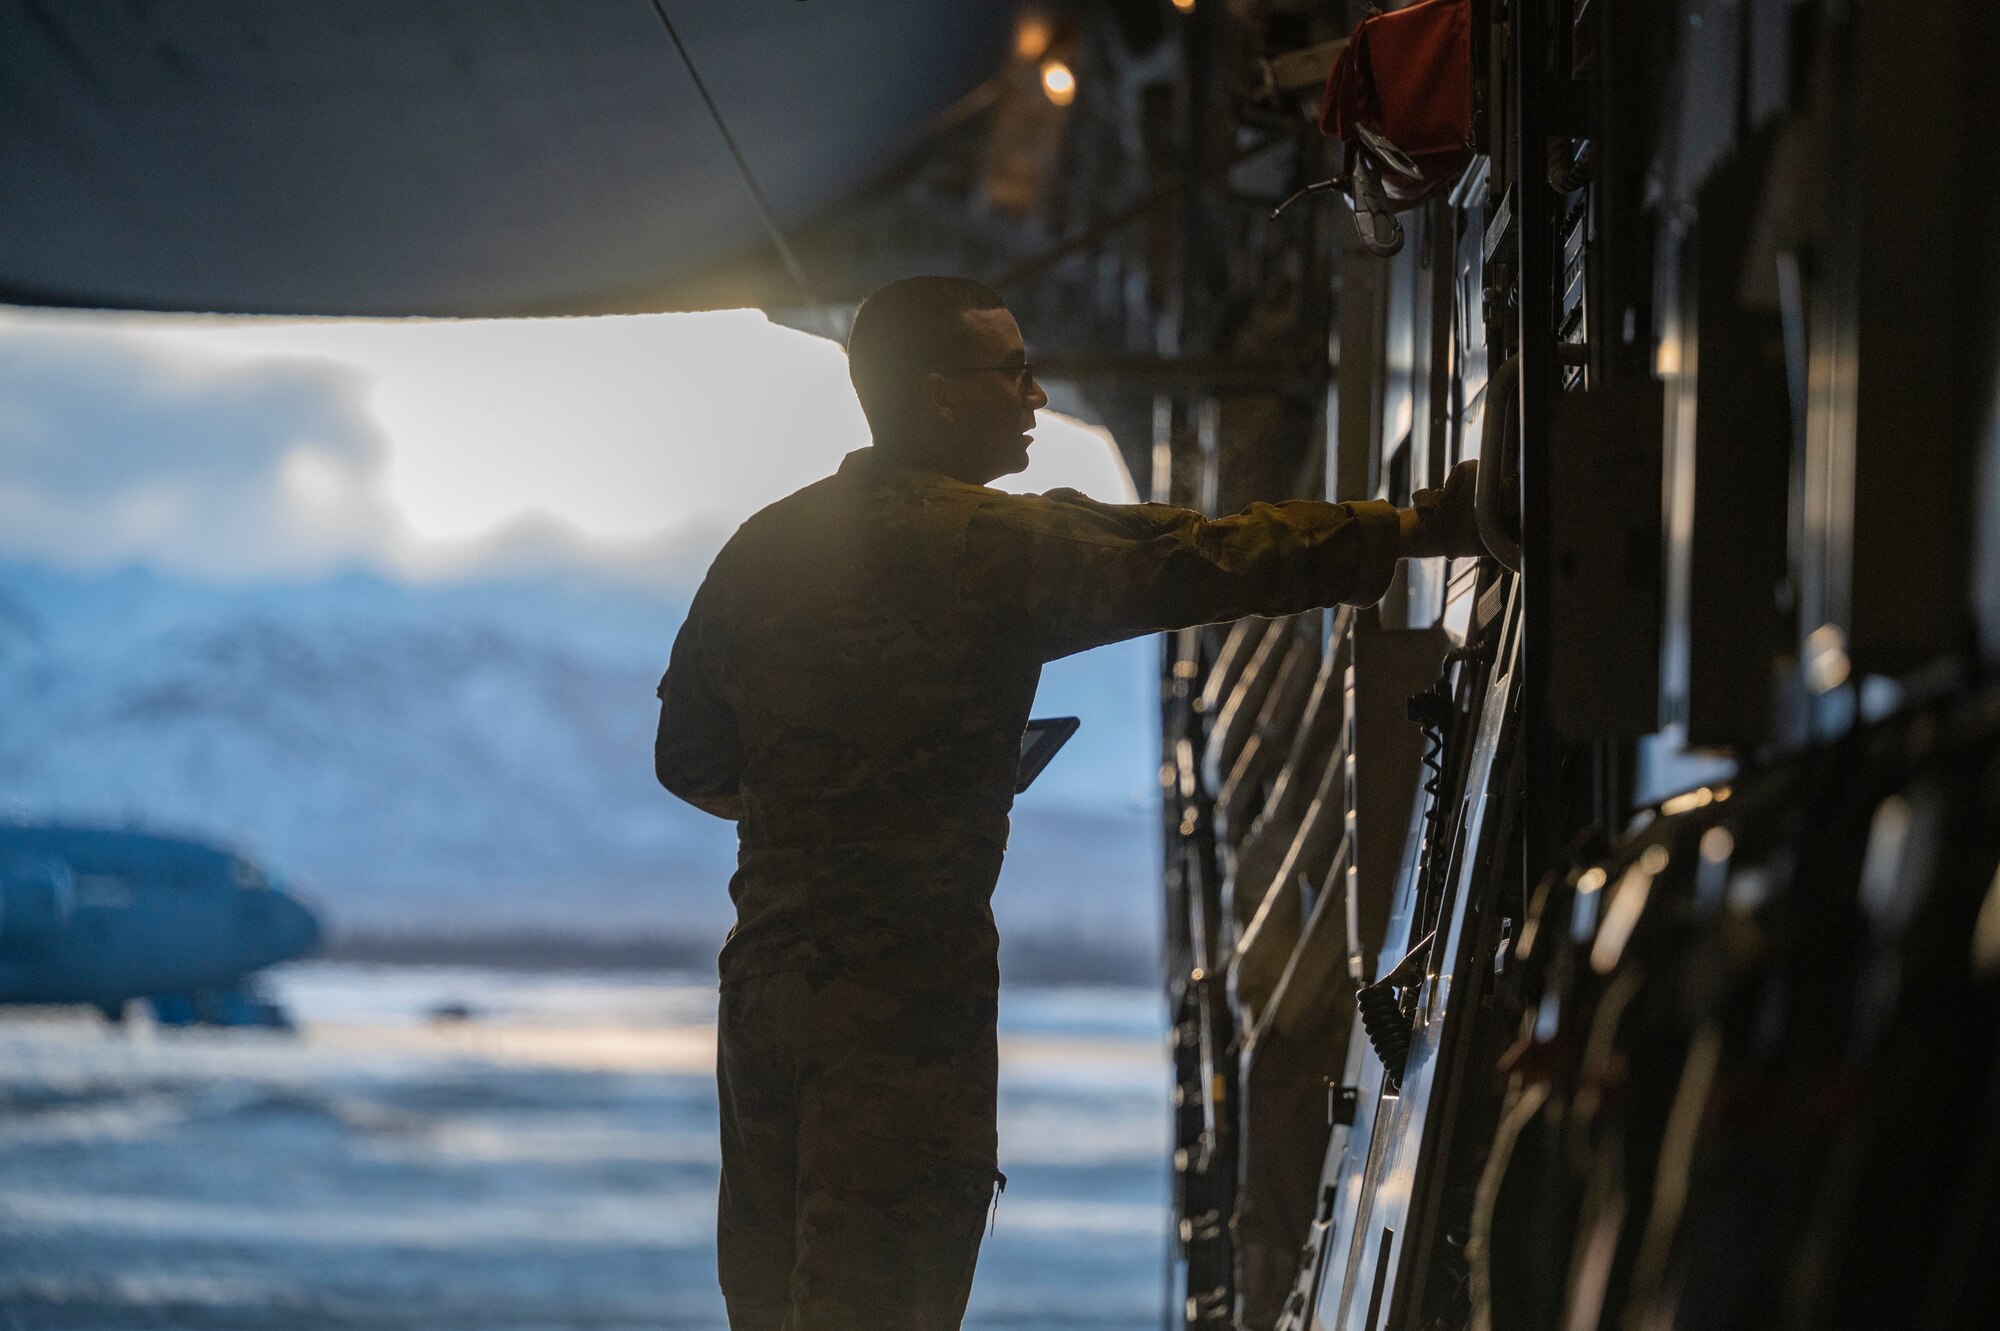 U.S. Air Force Tech. Sgt.  Liam Vining, a loadmaster assigned to the 8th Airlift Squadron, opens the bay door of a C-17 Globemaster III assigned to Joint Base Lewis-McChord, Washington, during Exercise Rainer War 22A at Joint Base Elmendorf-Richardson, Alaska, March 23, 2022. The exercise is designed to demonstrate the 62nd Airlift Wing’s ability to operate and survive while defeating challenges to the U.S. military advantage in all operating domains – air, land, sea and cyberspace. (U.S. Air Force photo by Airman 1st Class Charles Casner)